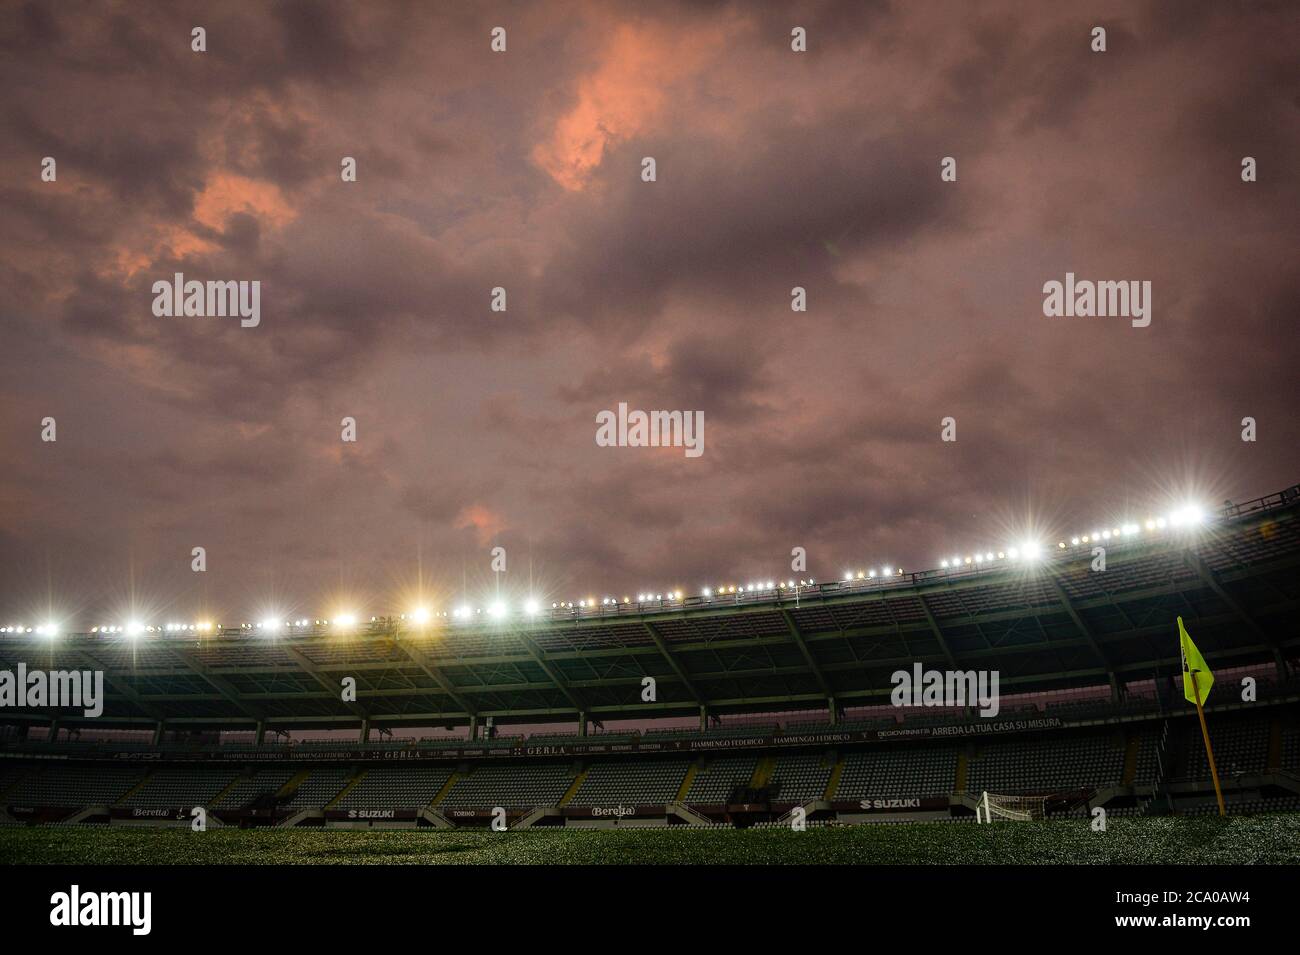 Turin, Italy - 29 July, 2020: General view shows stadio Olimpico Grande Torino at sunset prior to the Serie A football match between Torino FC and AS Roma. AS Roma won 3-2 over Torino FC. Credit: Nicolò Campo/Alamy Live News Stock Photo